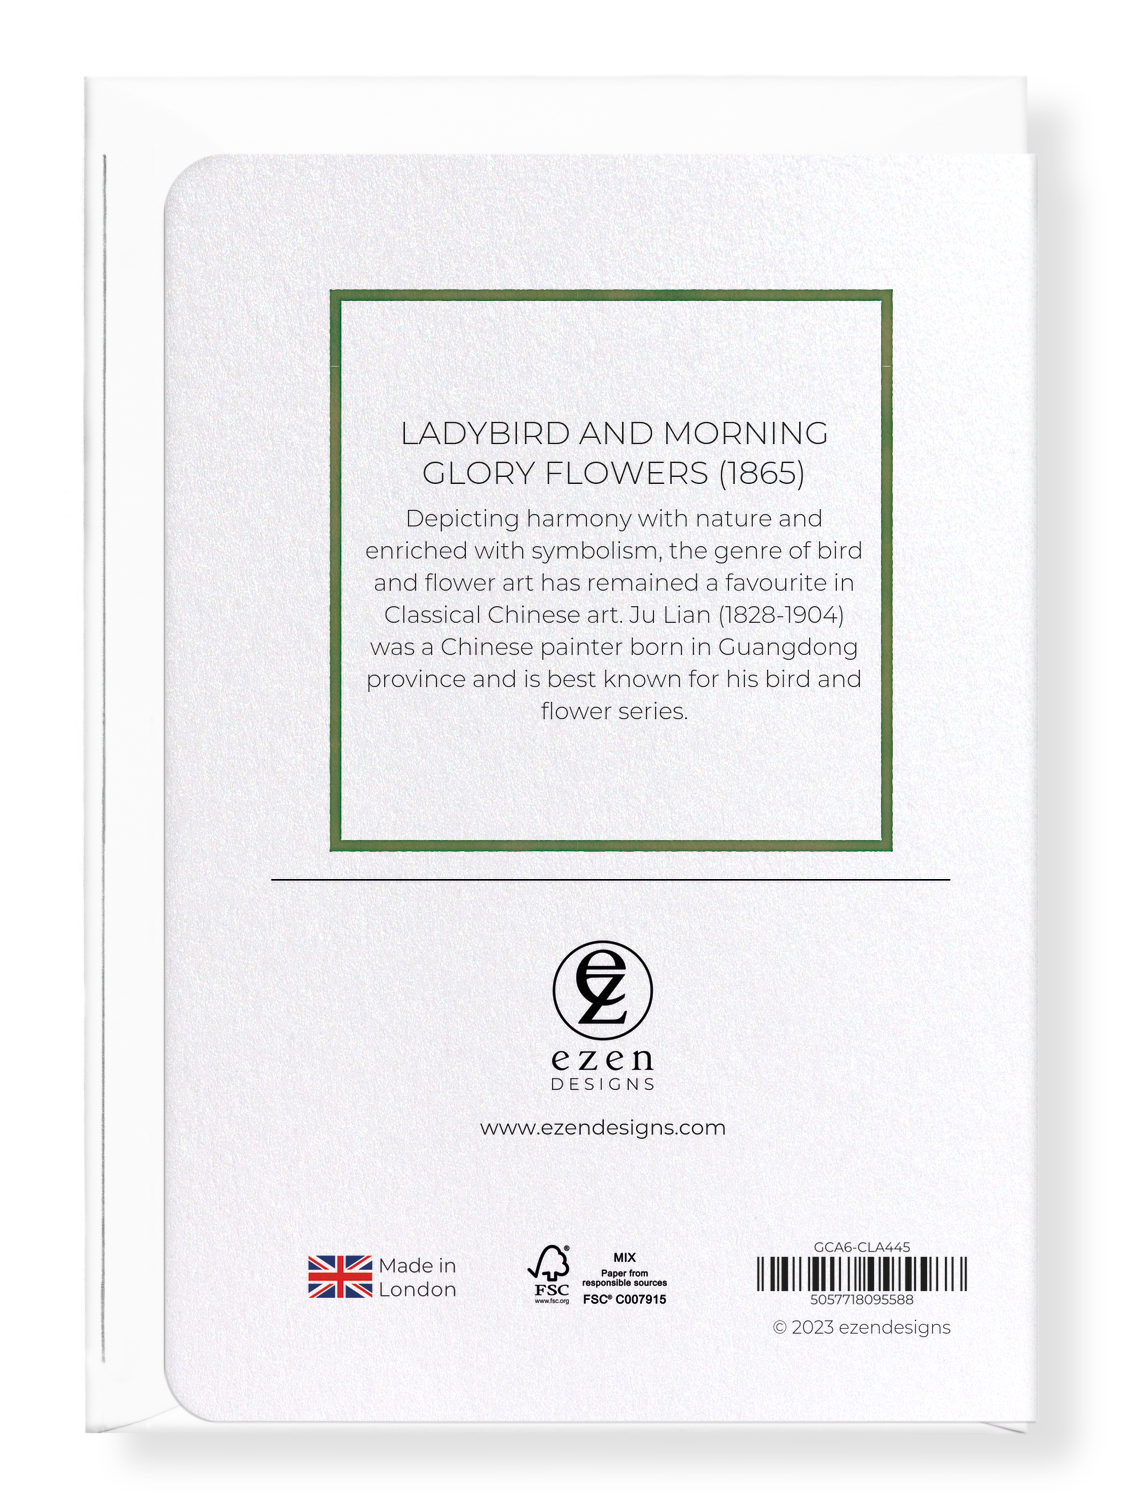 Ezen Designs - Ladybird and Morning Glory Flowers (1865) - Greeting Card - Back